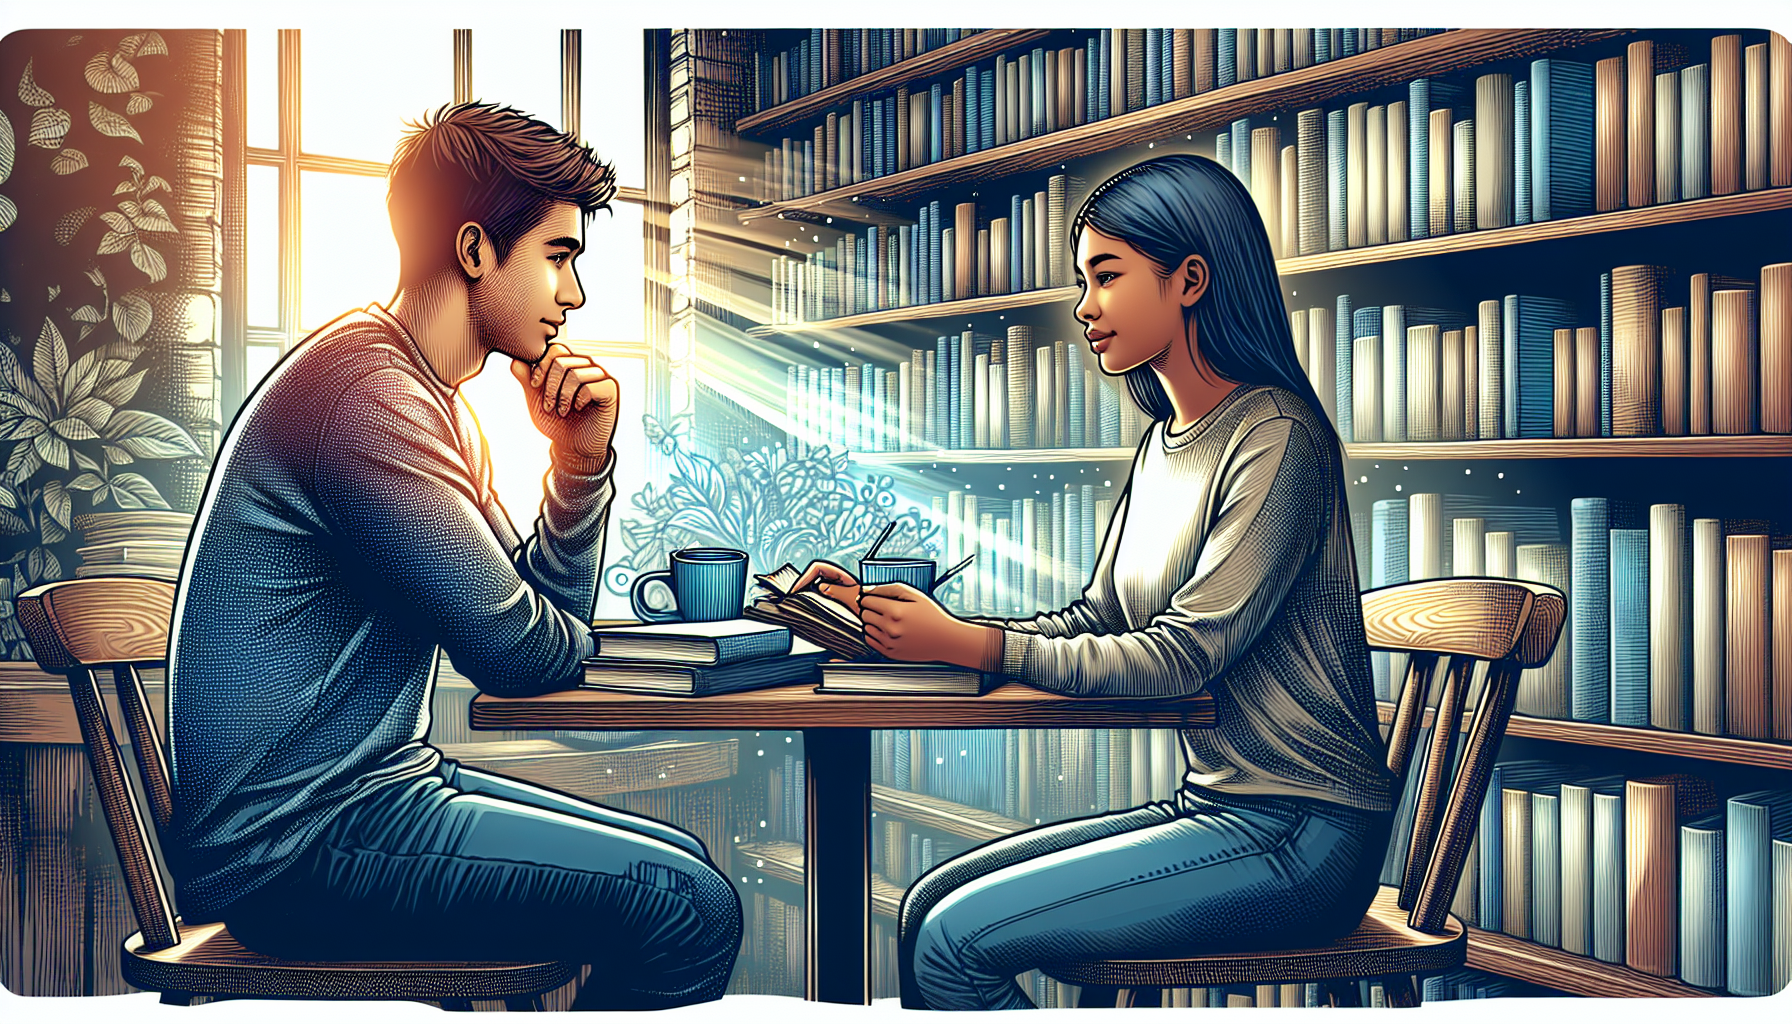 An intimate painting illustrating a young couple tenderly discussing their dreams in a cozy, book-filled coffee shop, with soft light filtering through a nearby window highlighting their focused expre